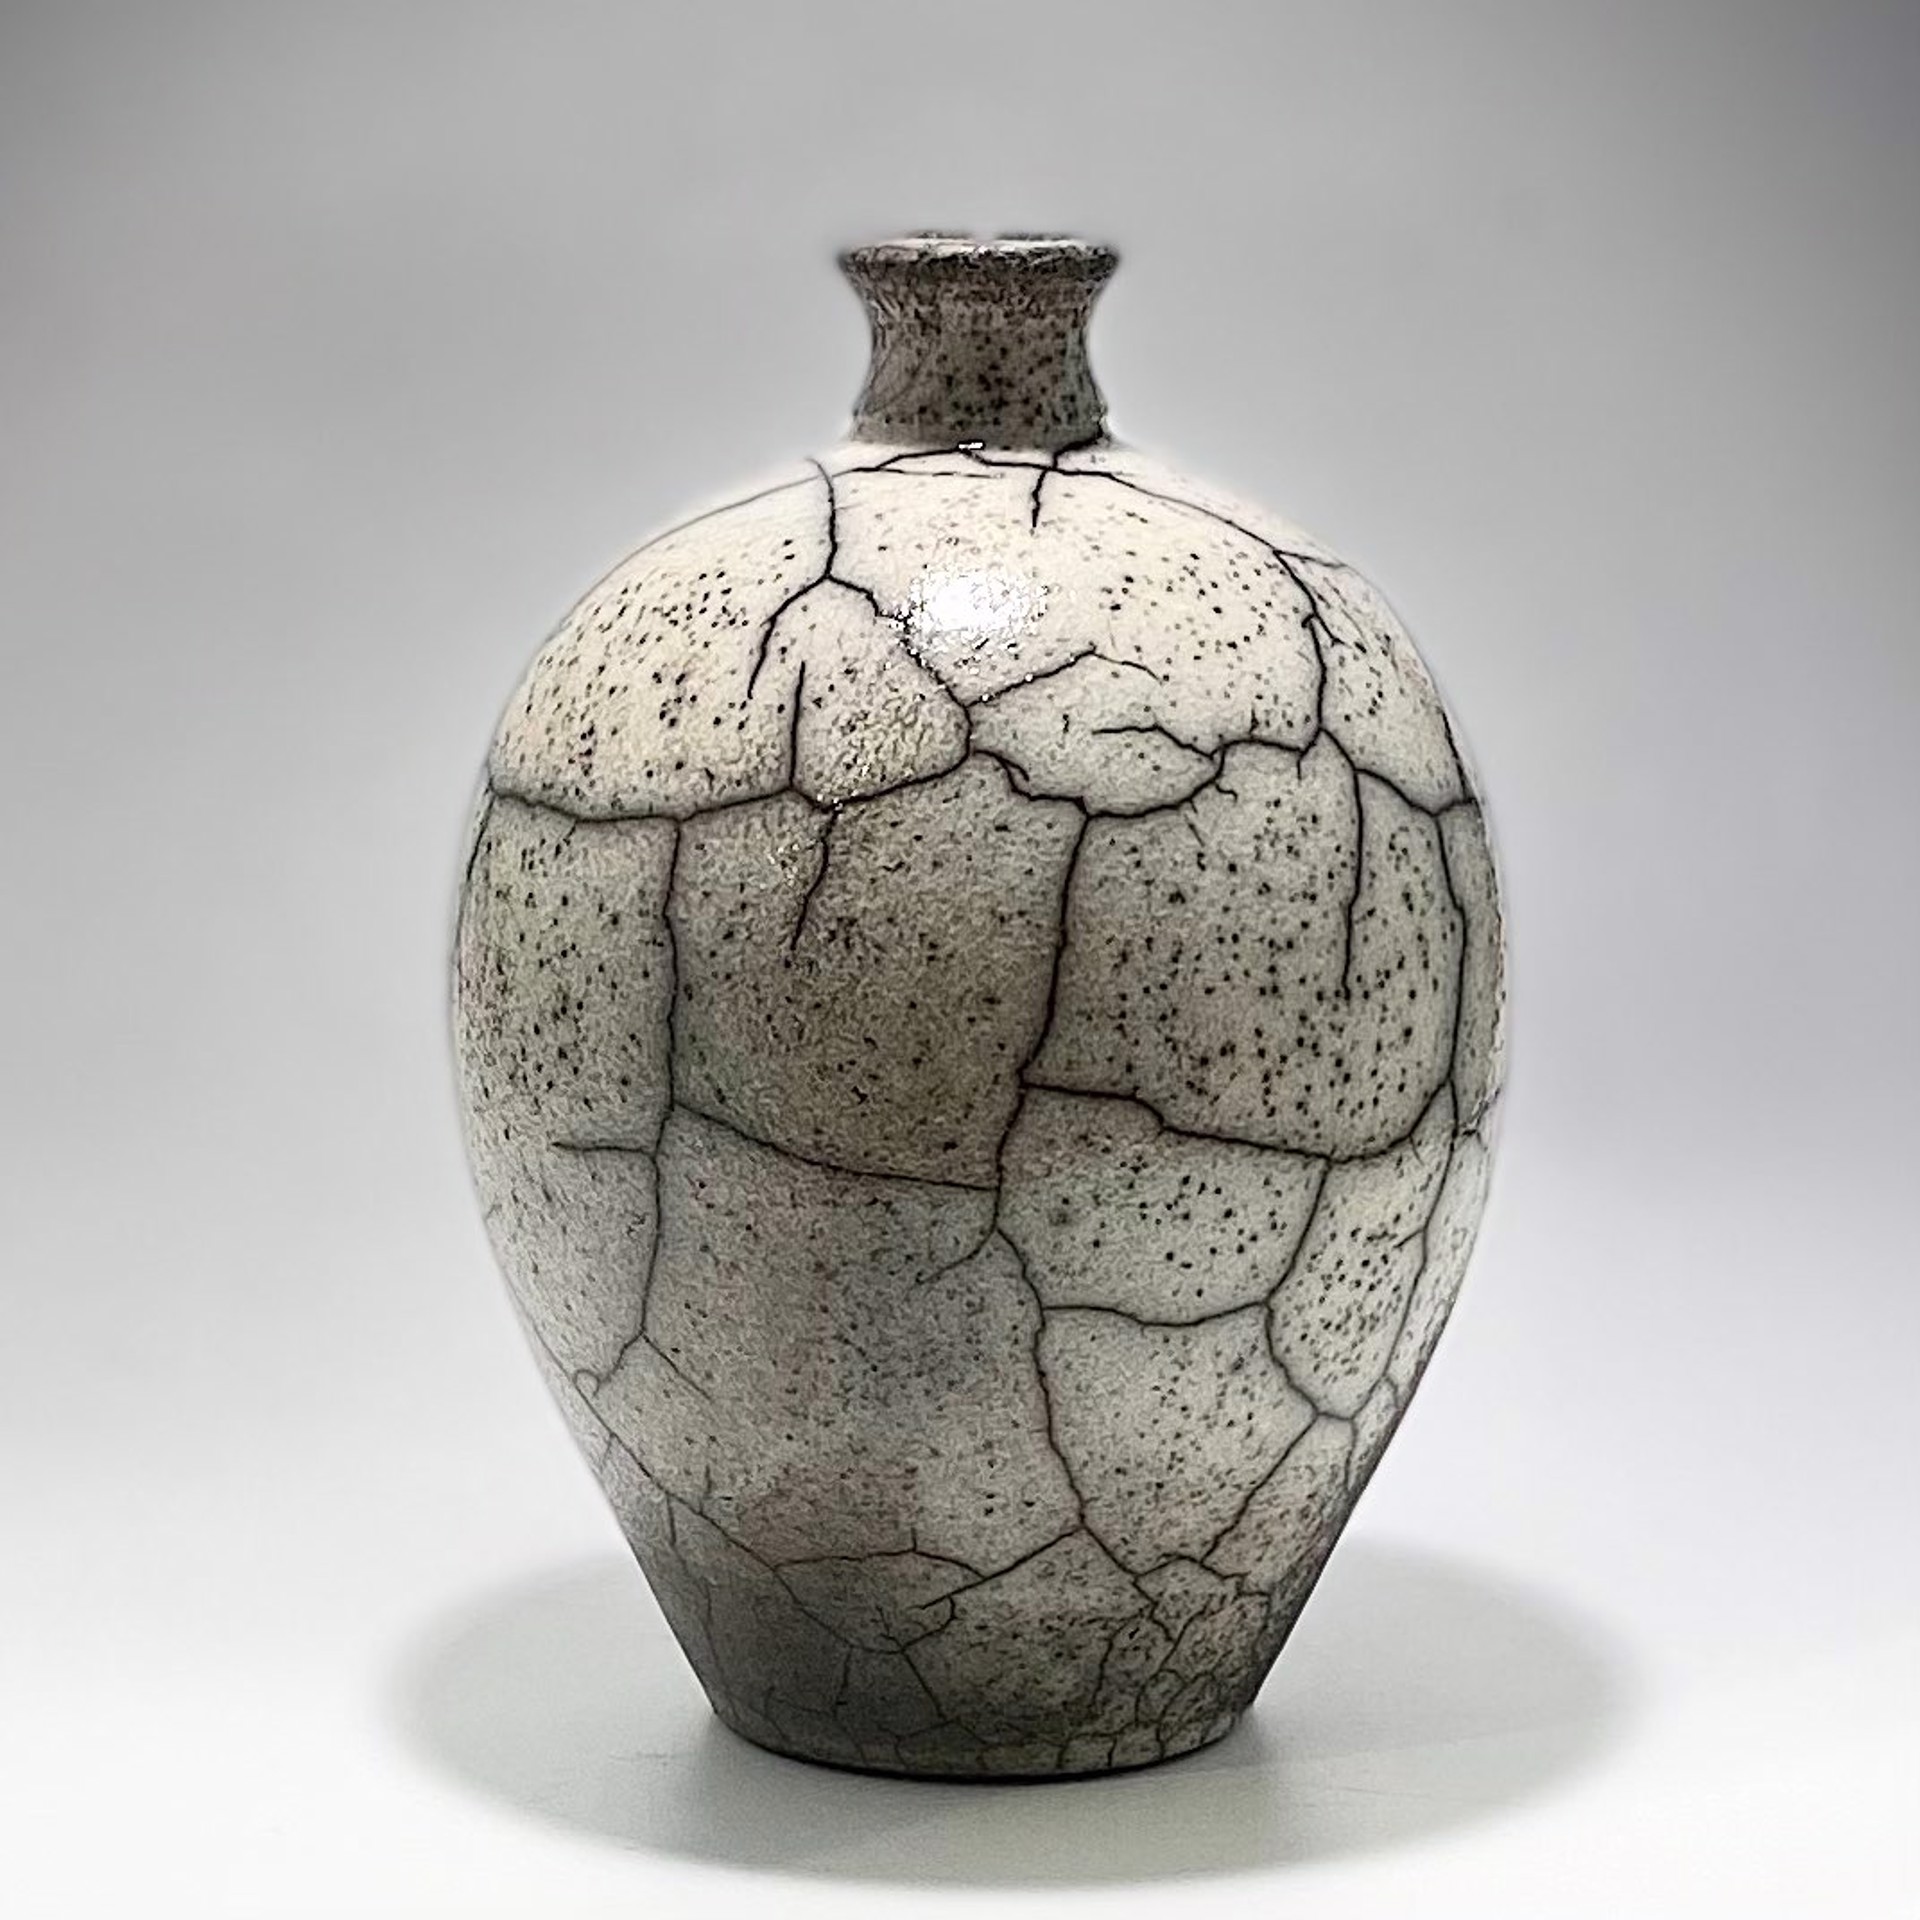 Small White Crackle Vase SB22-29 by Silas Bradley